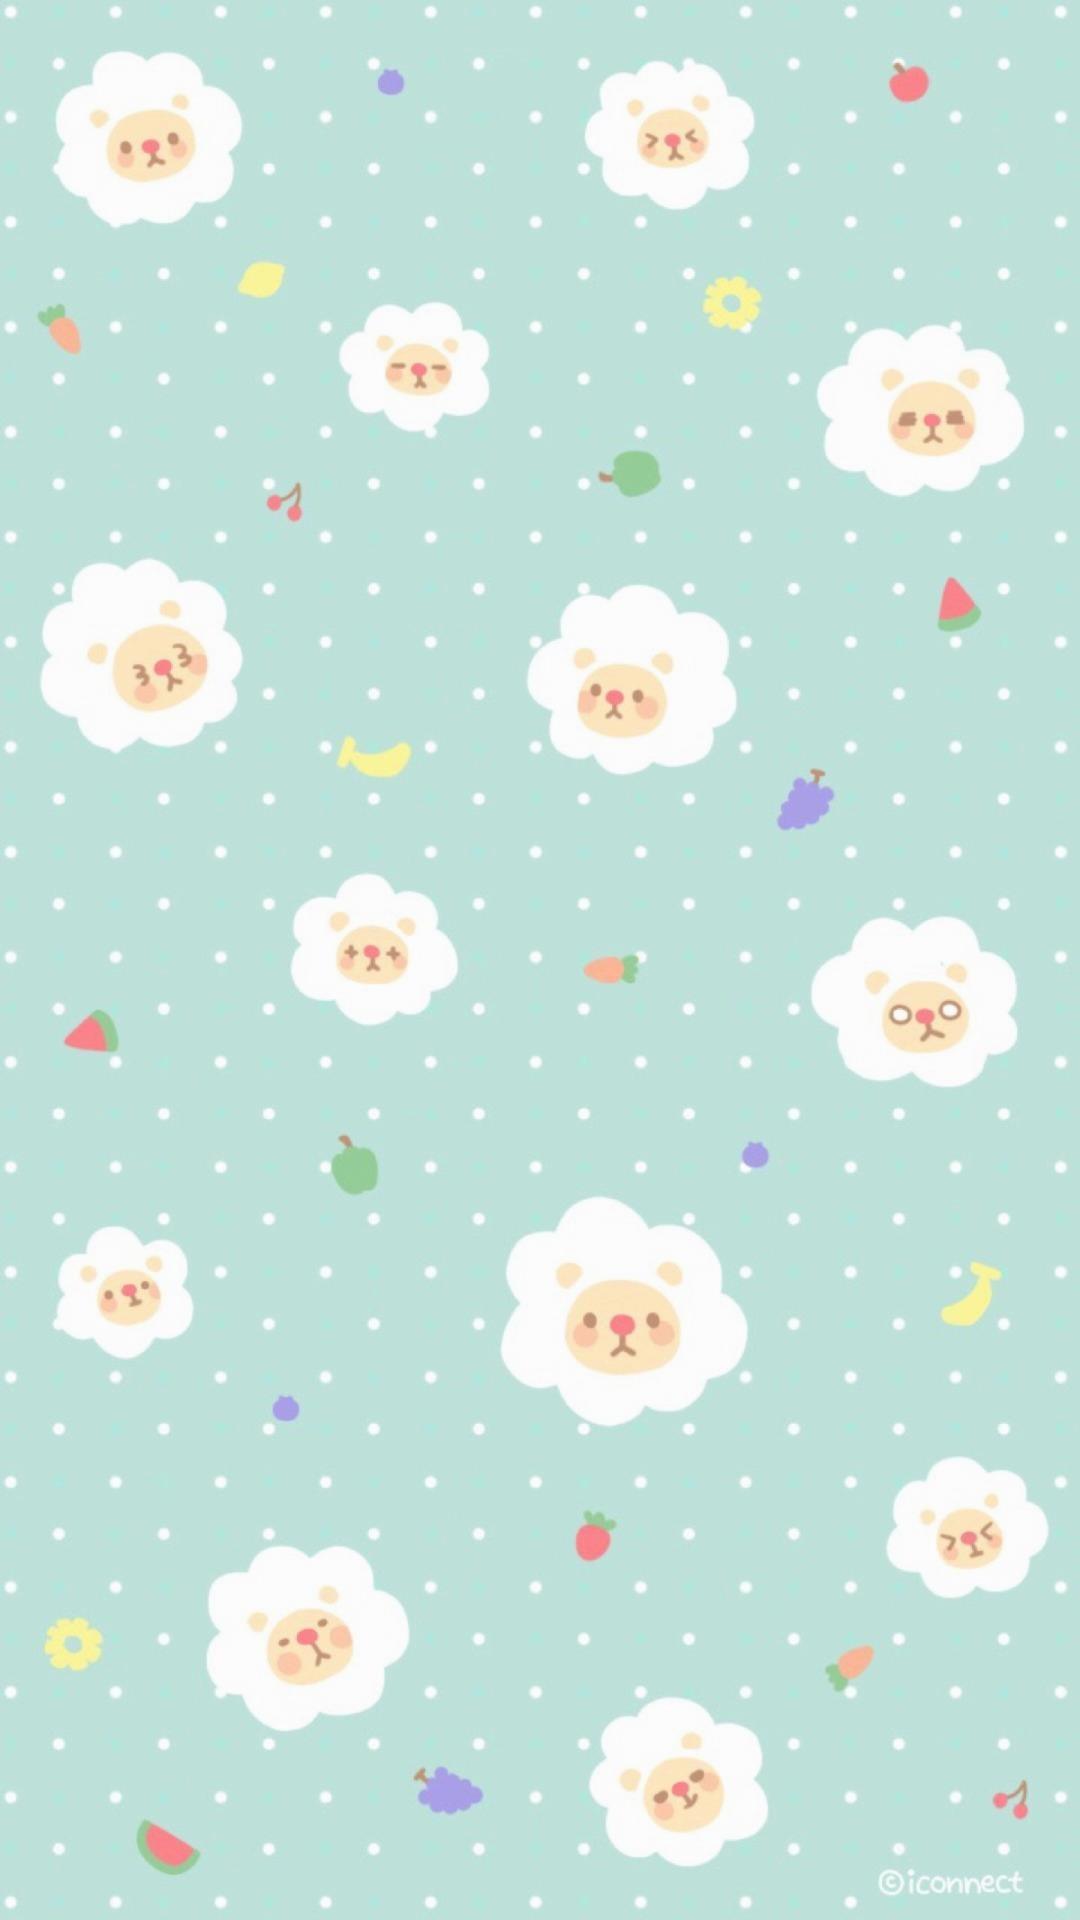 Cute Wallpaper for Phone Background